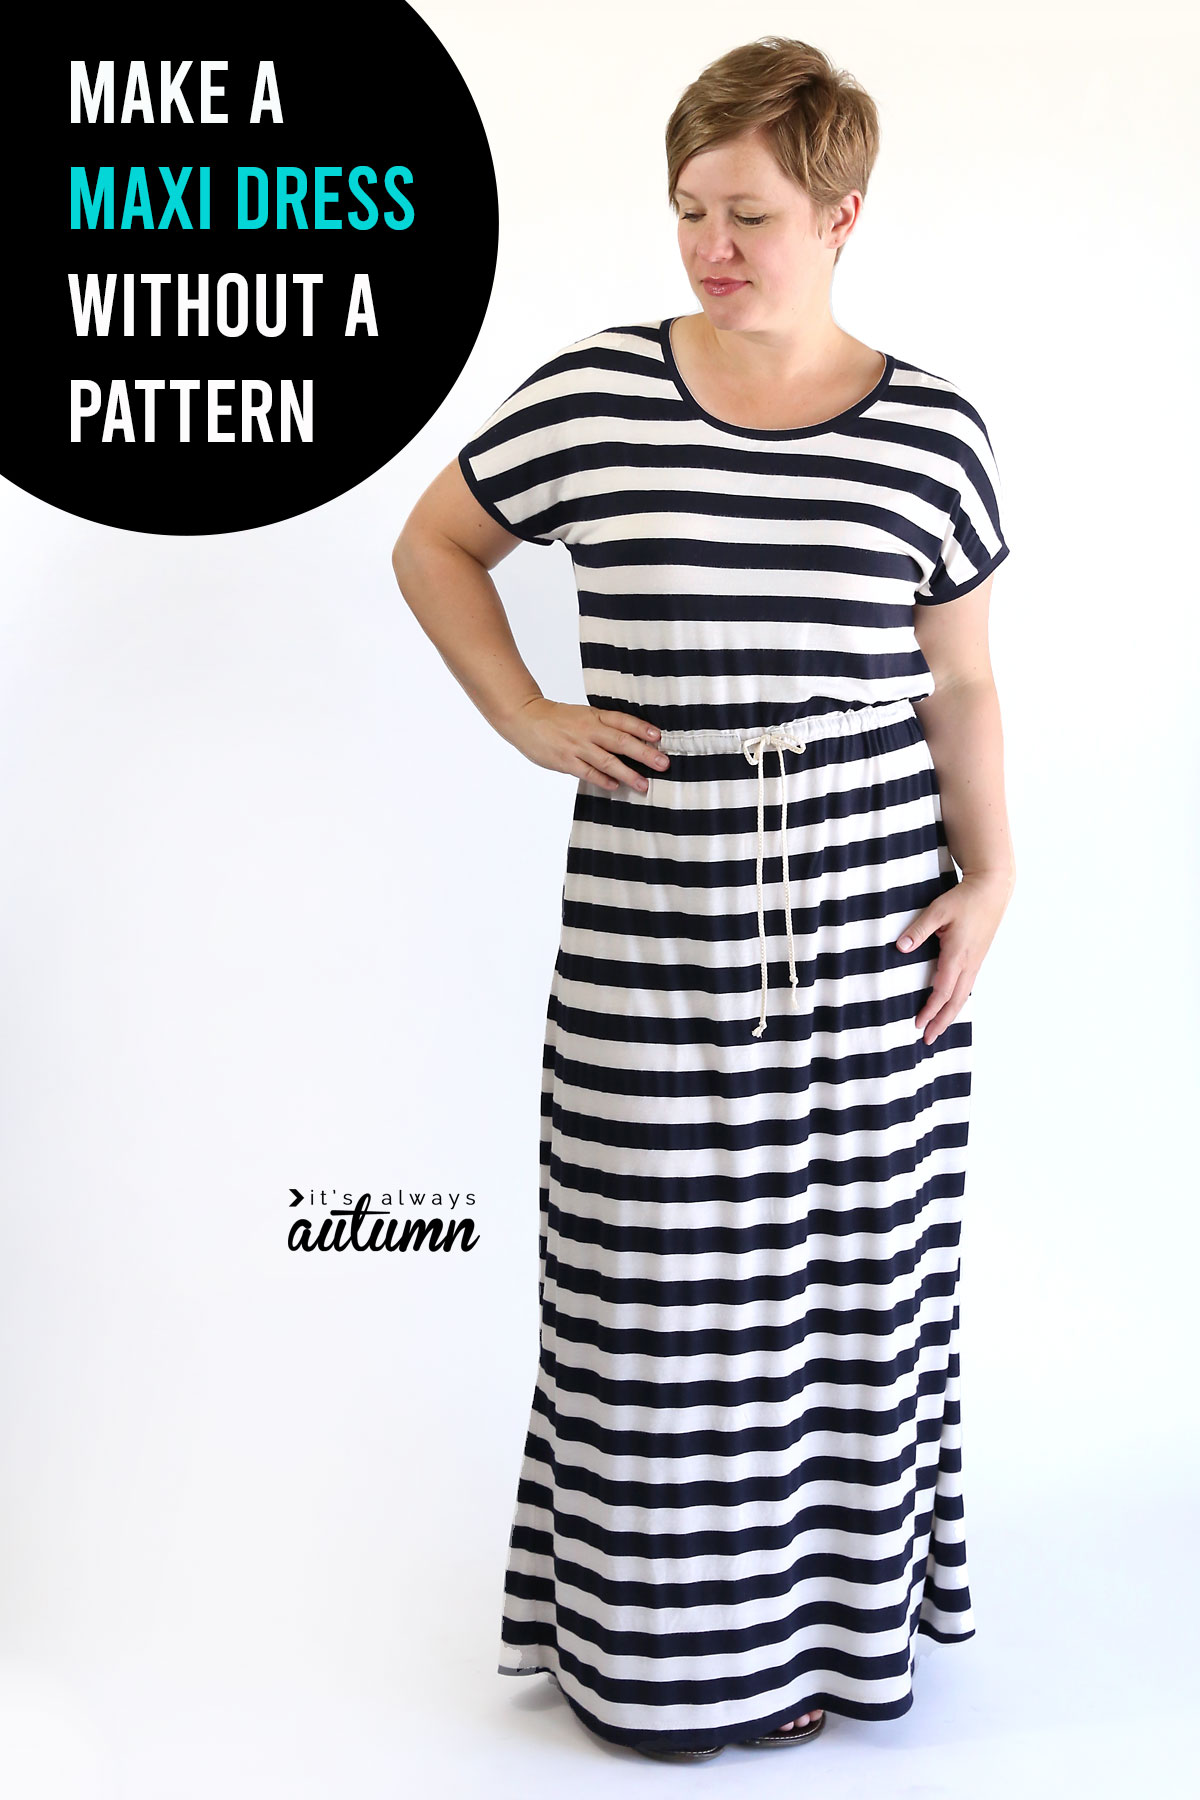 How to sew a maxi dress without a pattern. This is the easiest possible way to make a maxi dress!